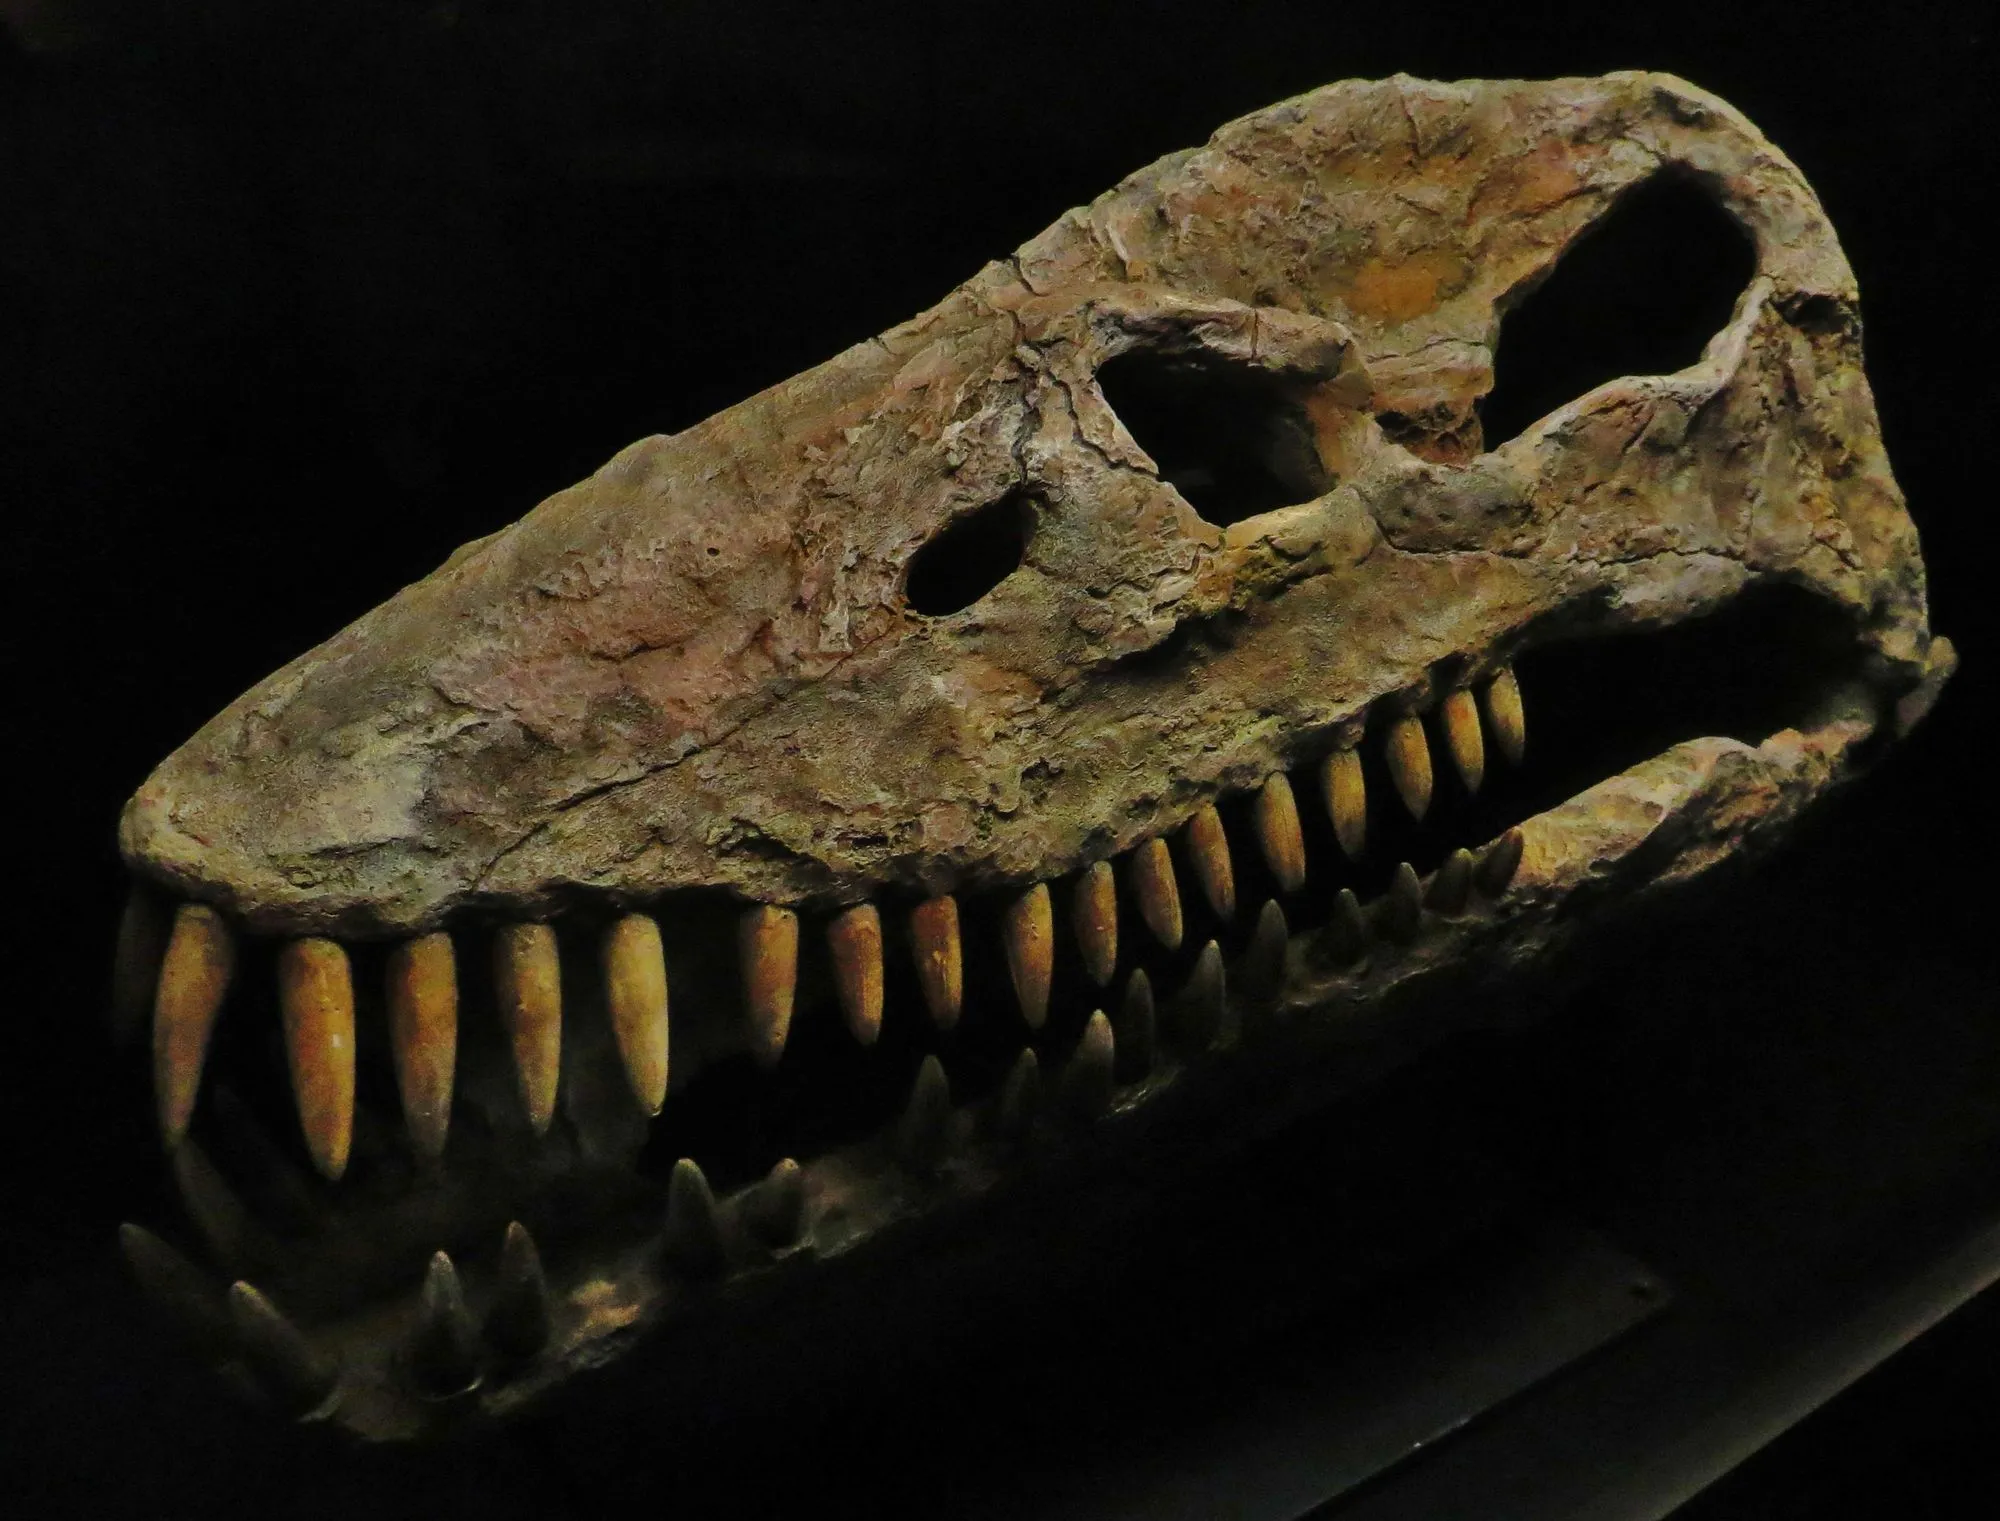 The Thalassomedon skeleton of this Plesiosauria was found near long stones in the ocean bed.